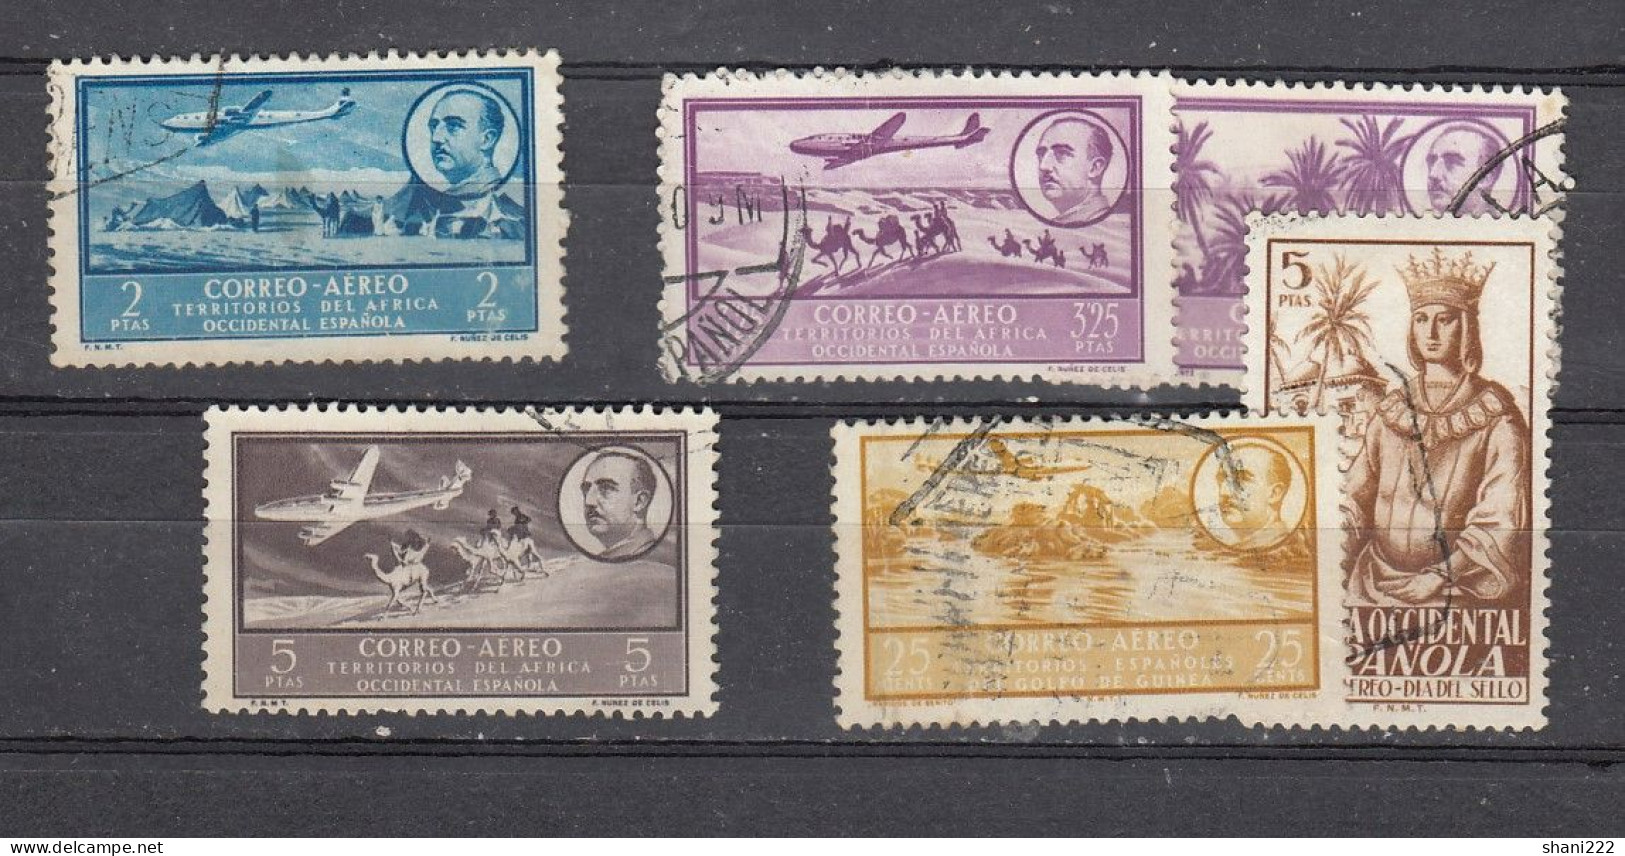 Spanish West Africa - 1951 -Airs - Some Used Items (e-750) - Spanische Sahara